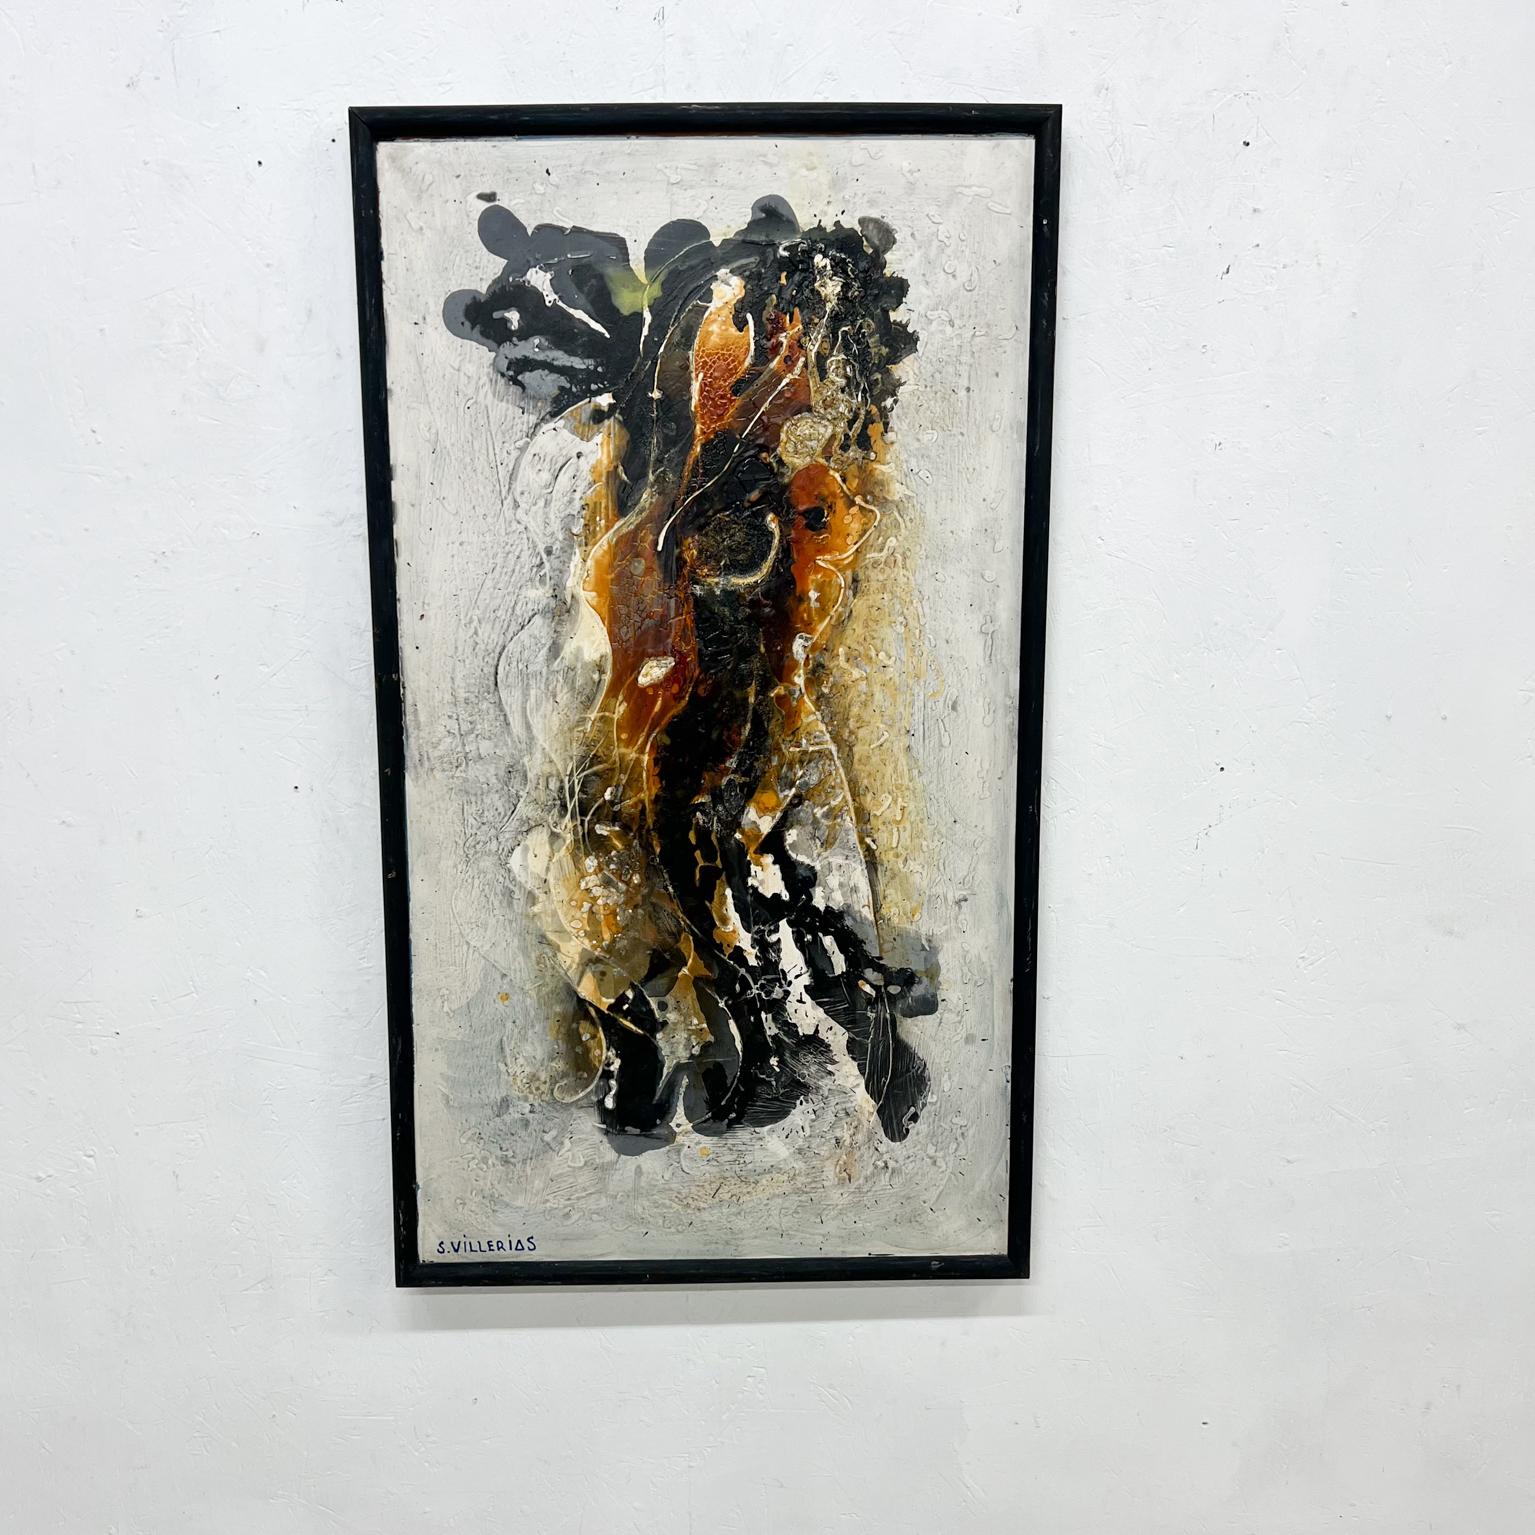 1970s S. Villerias Modern Abstract Expression Artwork Acrylic painting
Art signed by S. Villerias.
Abstract acrylic on Masonite
With original wood frame.
Measures: 44.5 tall x 25.25 width 2 depth
Preowned original vintage condition. Refer to